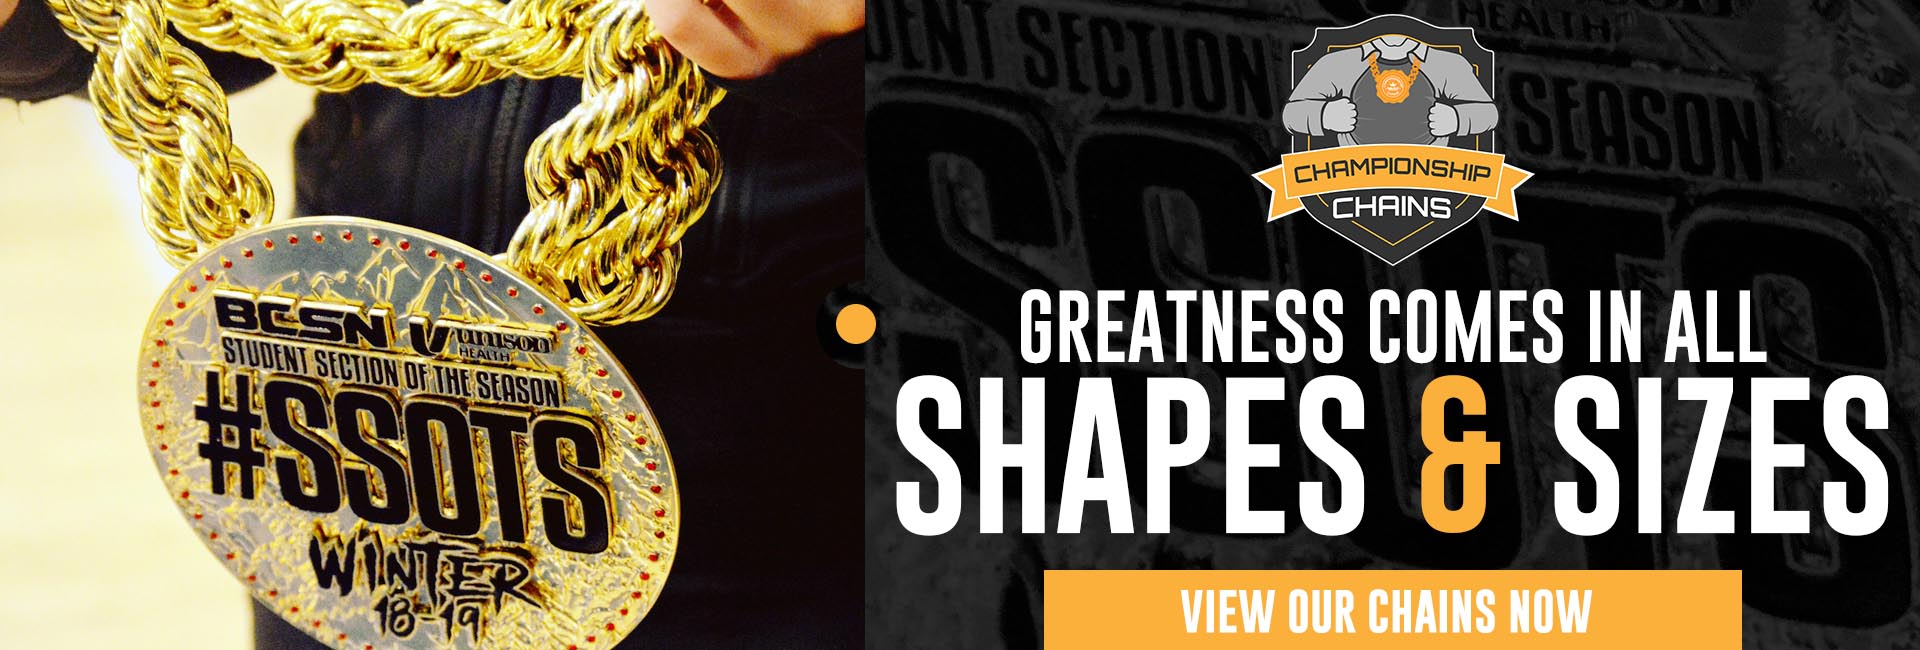 View our premier Championship Chains showroom now!